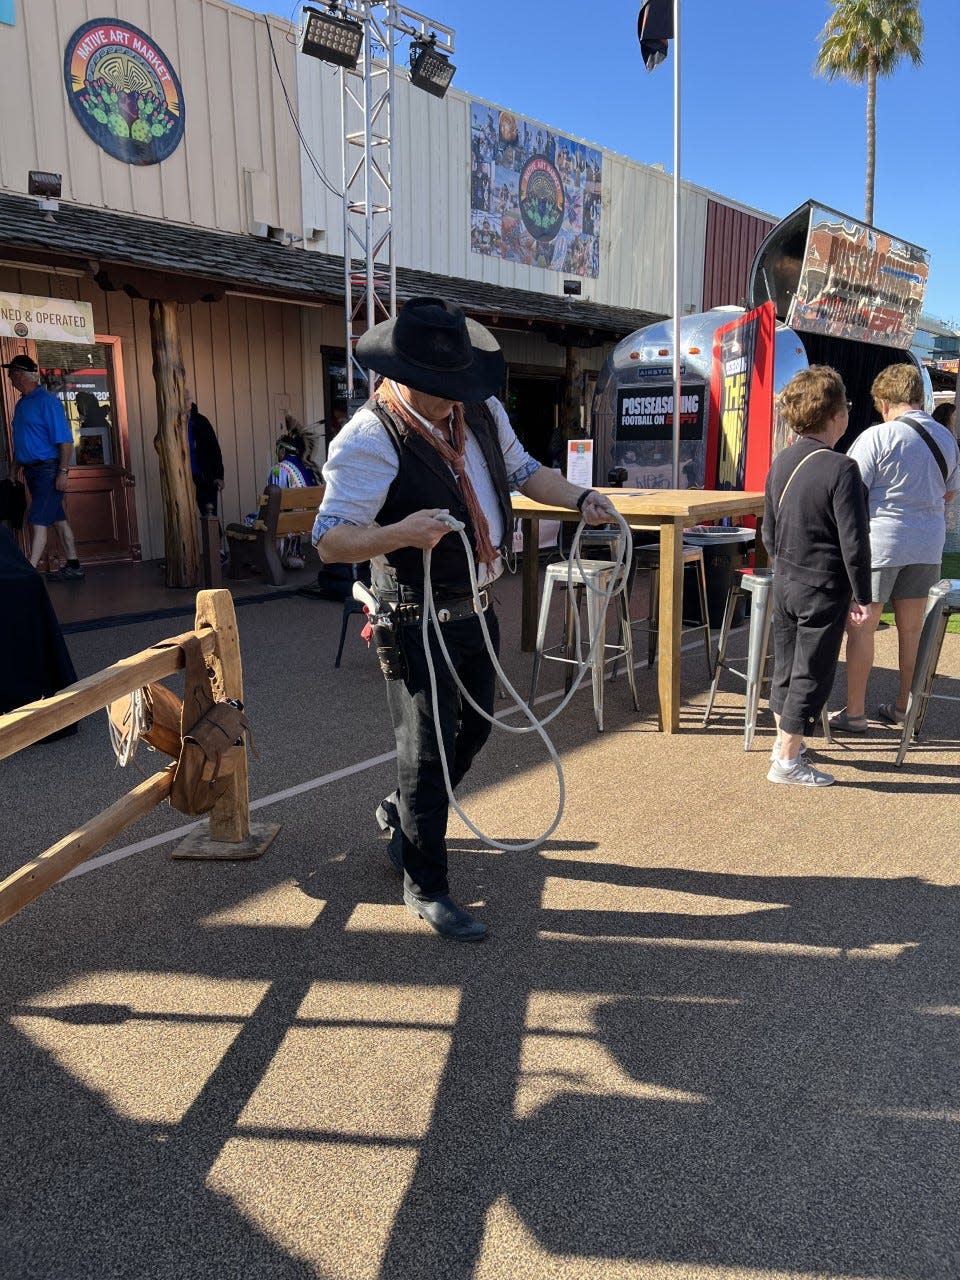 Wild West Fall Fest is a family-friendly event set in an old west town.